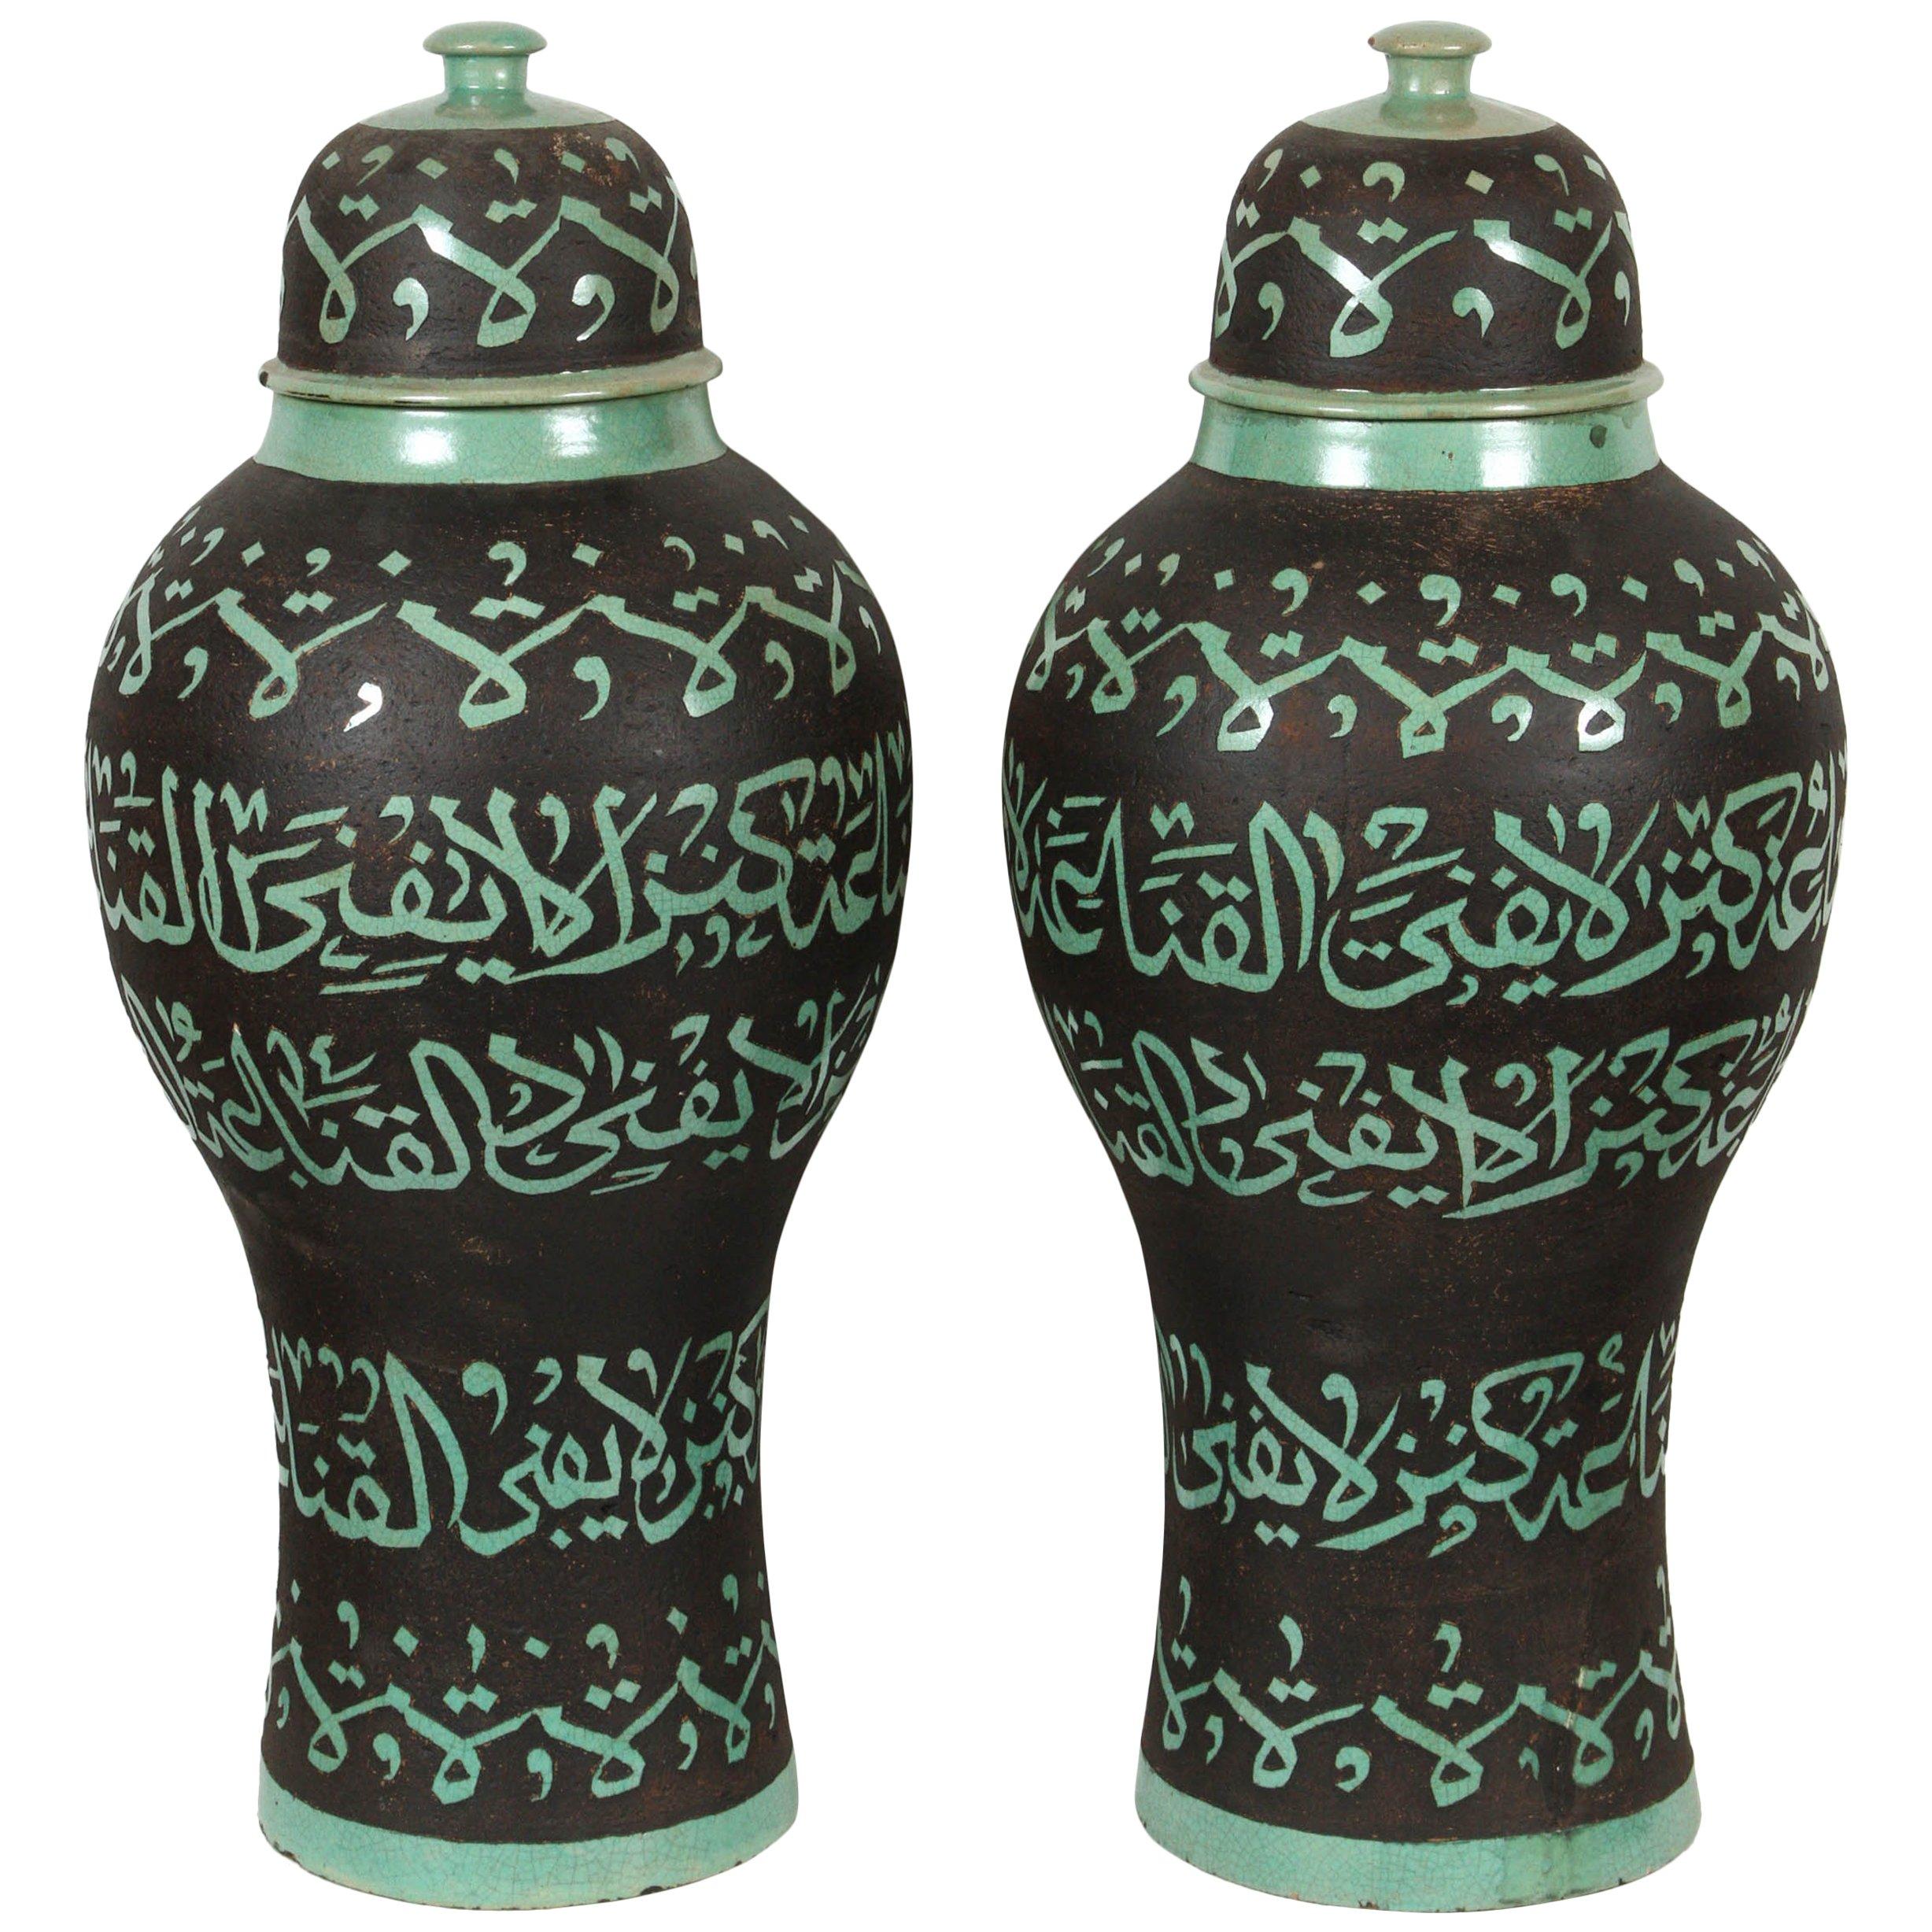 Moroccan Green Ceramic Urns with Arabic Calligraphy Lettrism Art Writing